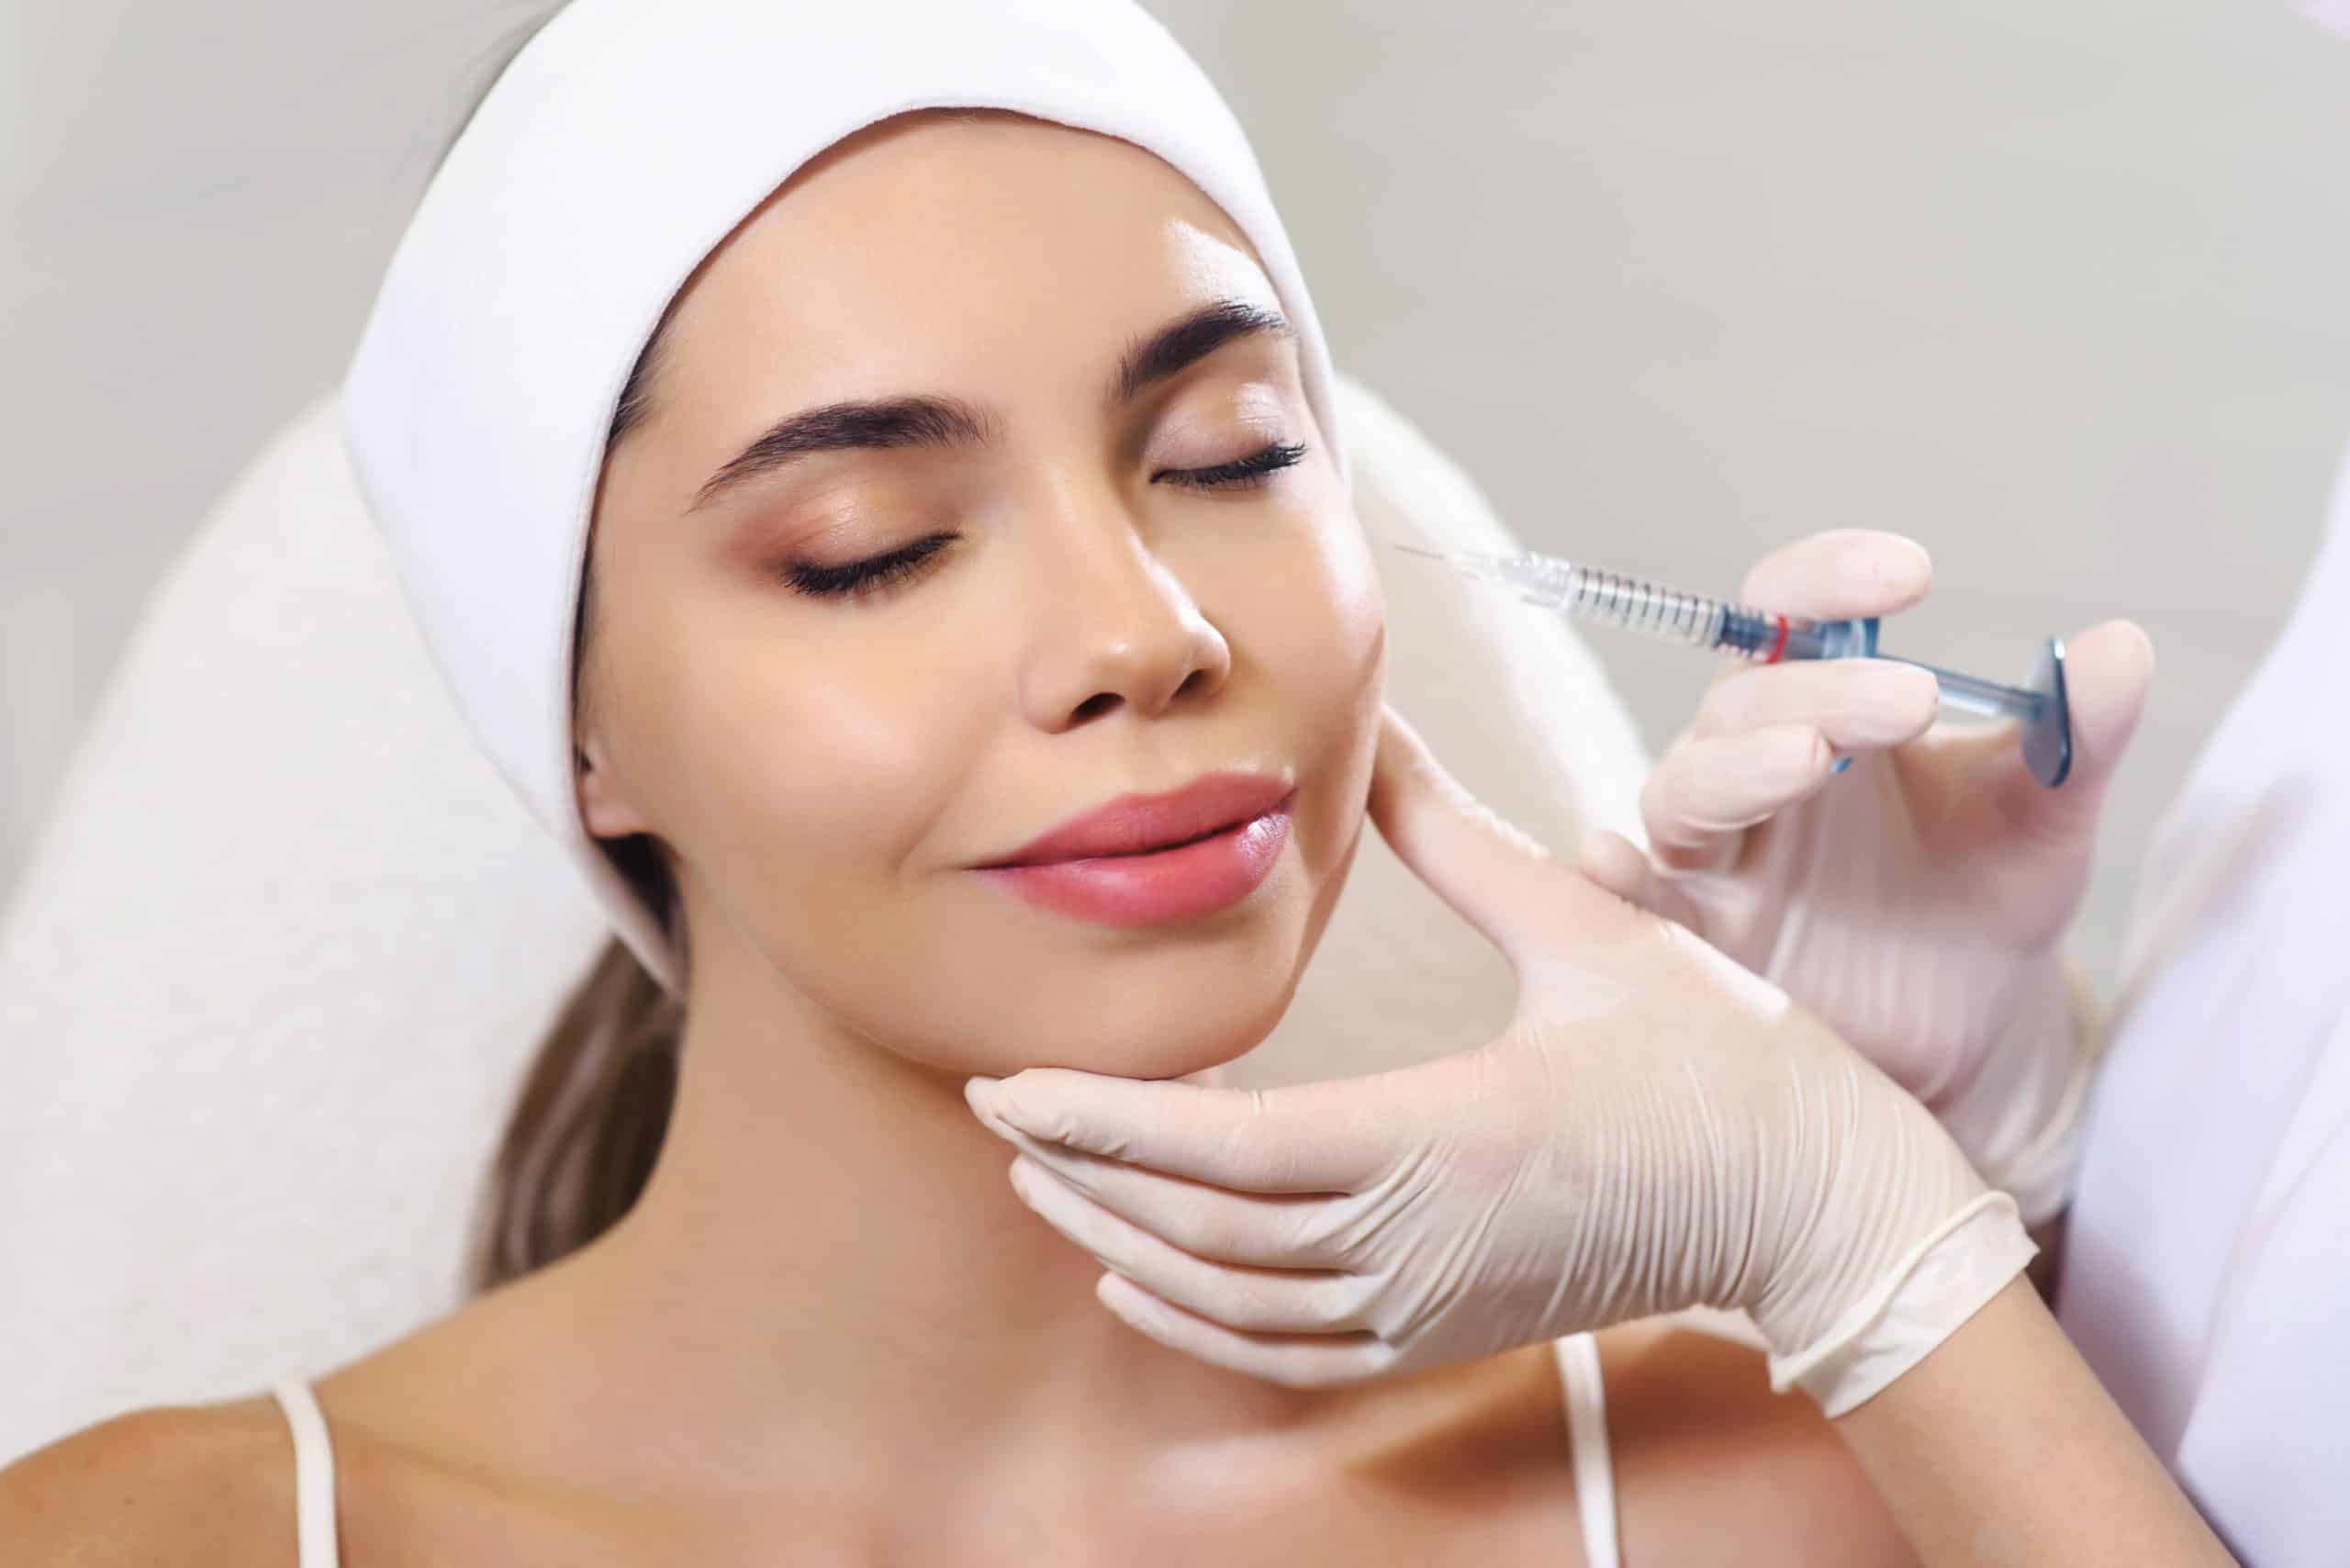 Xeomin The New Botox Alternative You Need to Know About